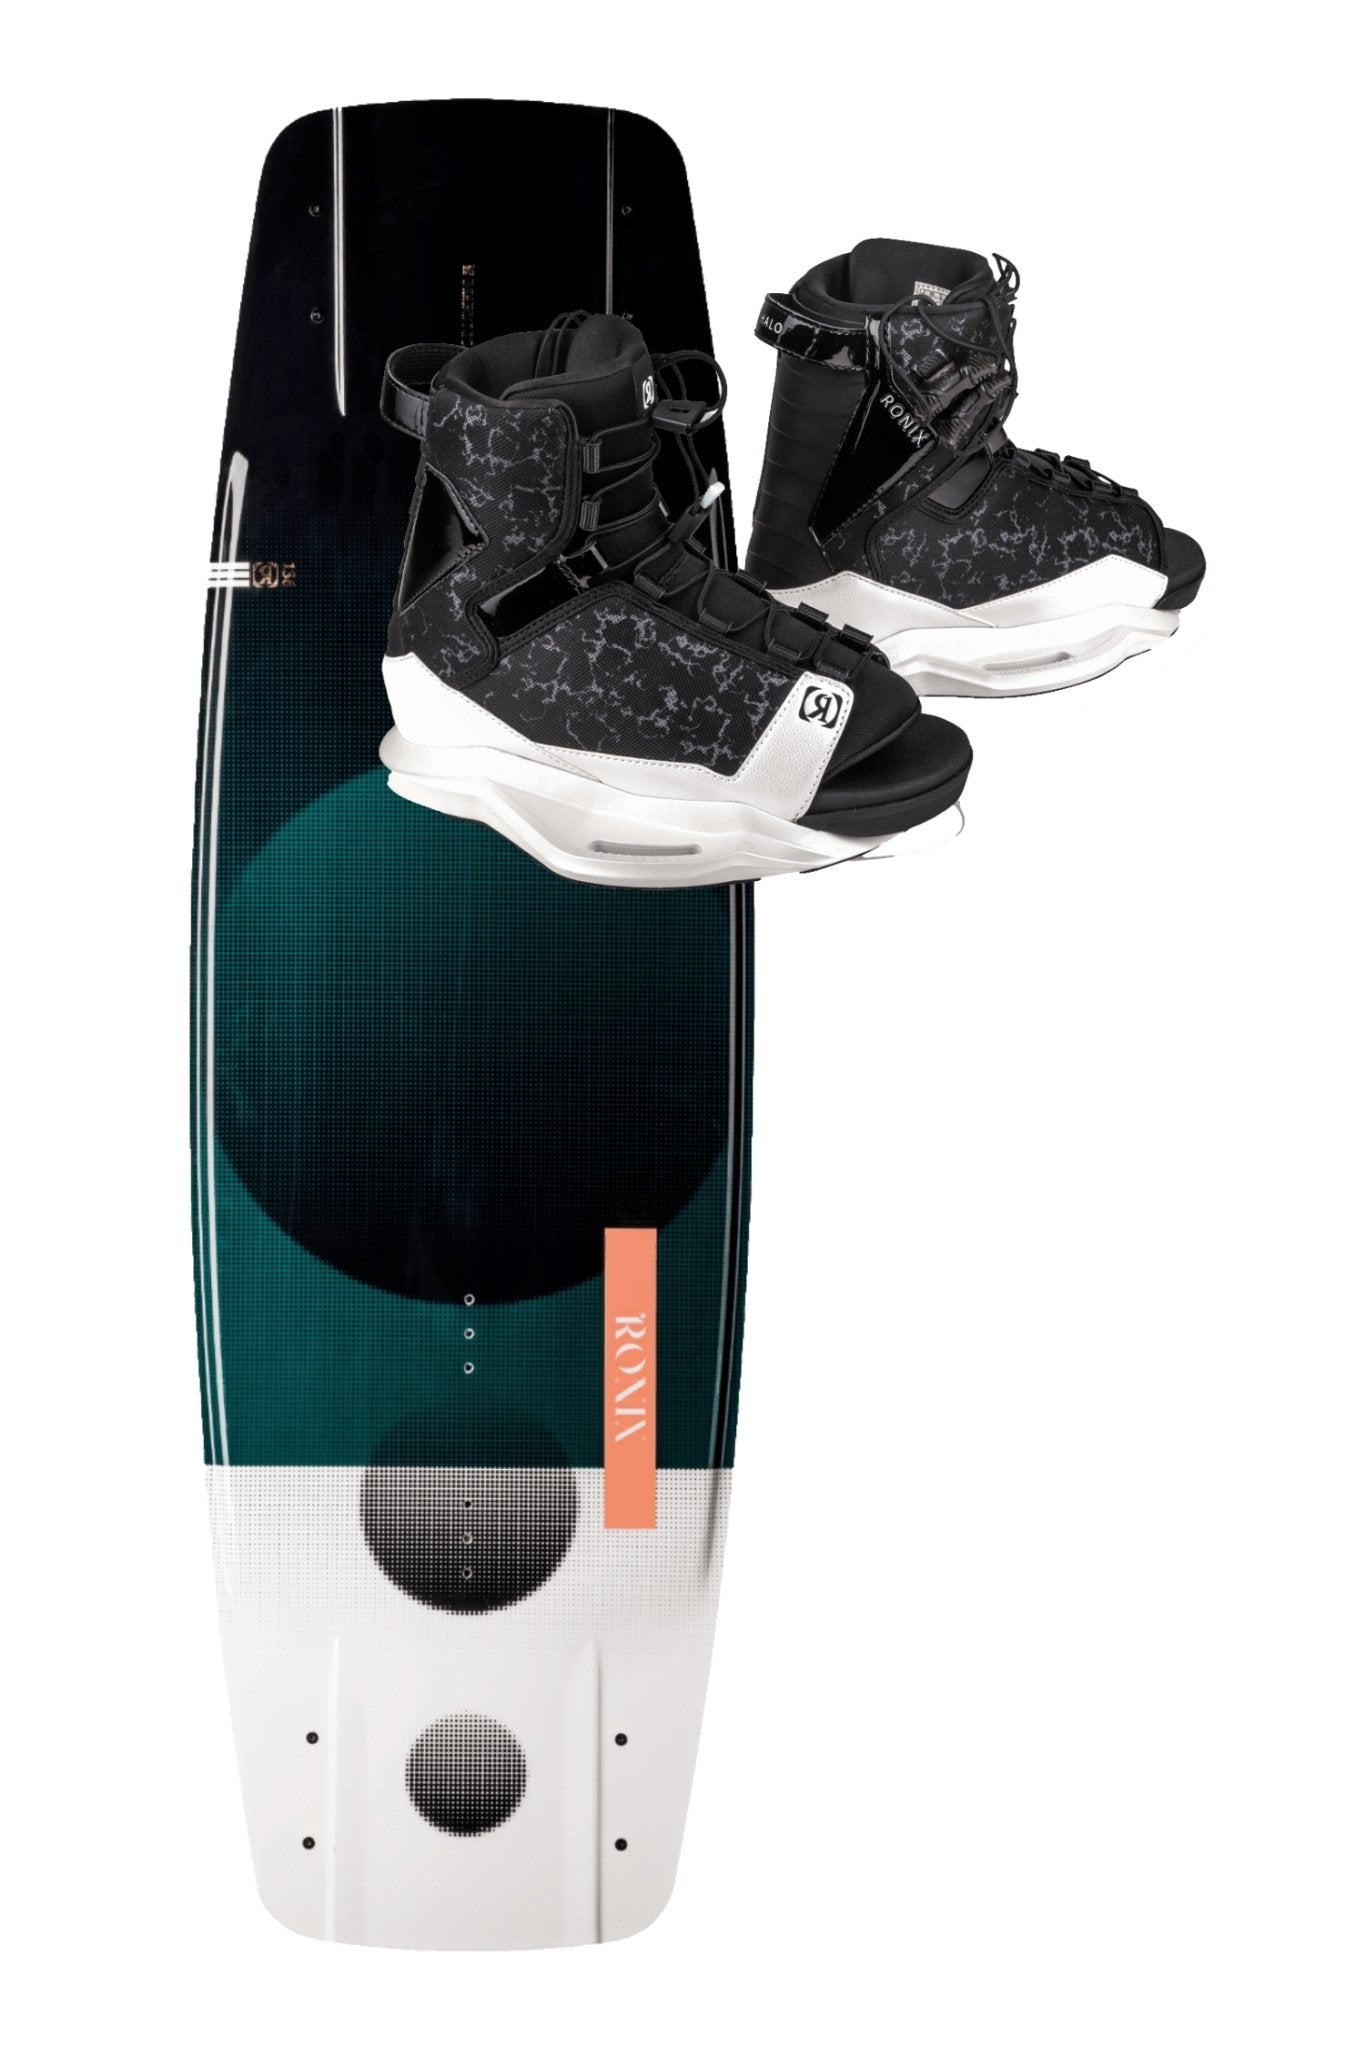 2023 Rise Wakeboard -Ronix232100-132-Halo-W 6 to 8.5